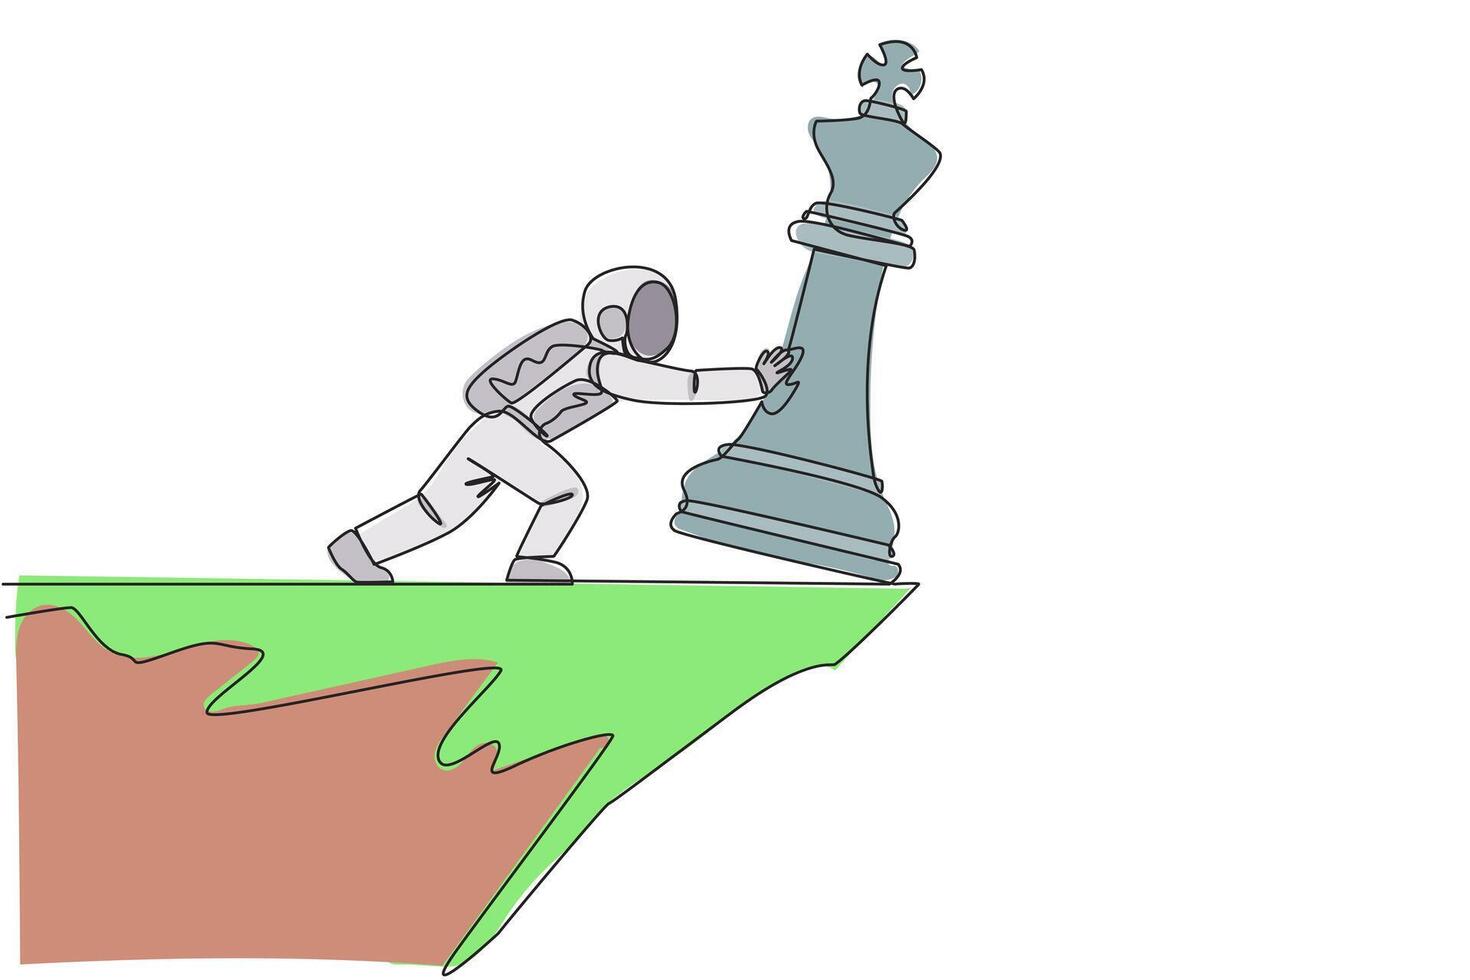 Single one line drawing astronaut pushes giant chess piece of king over the edge of a cliff. Lost leader during an expedition on the lunar surface. Cosmic. Continuous line design graphic illustration vector